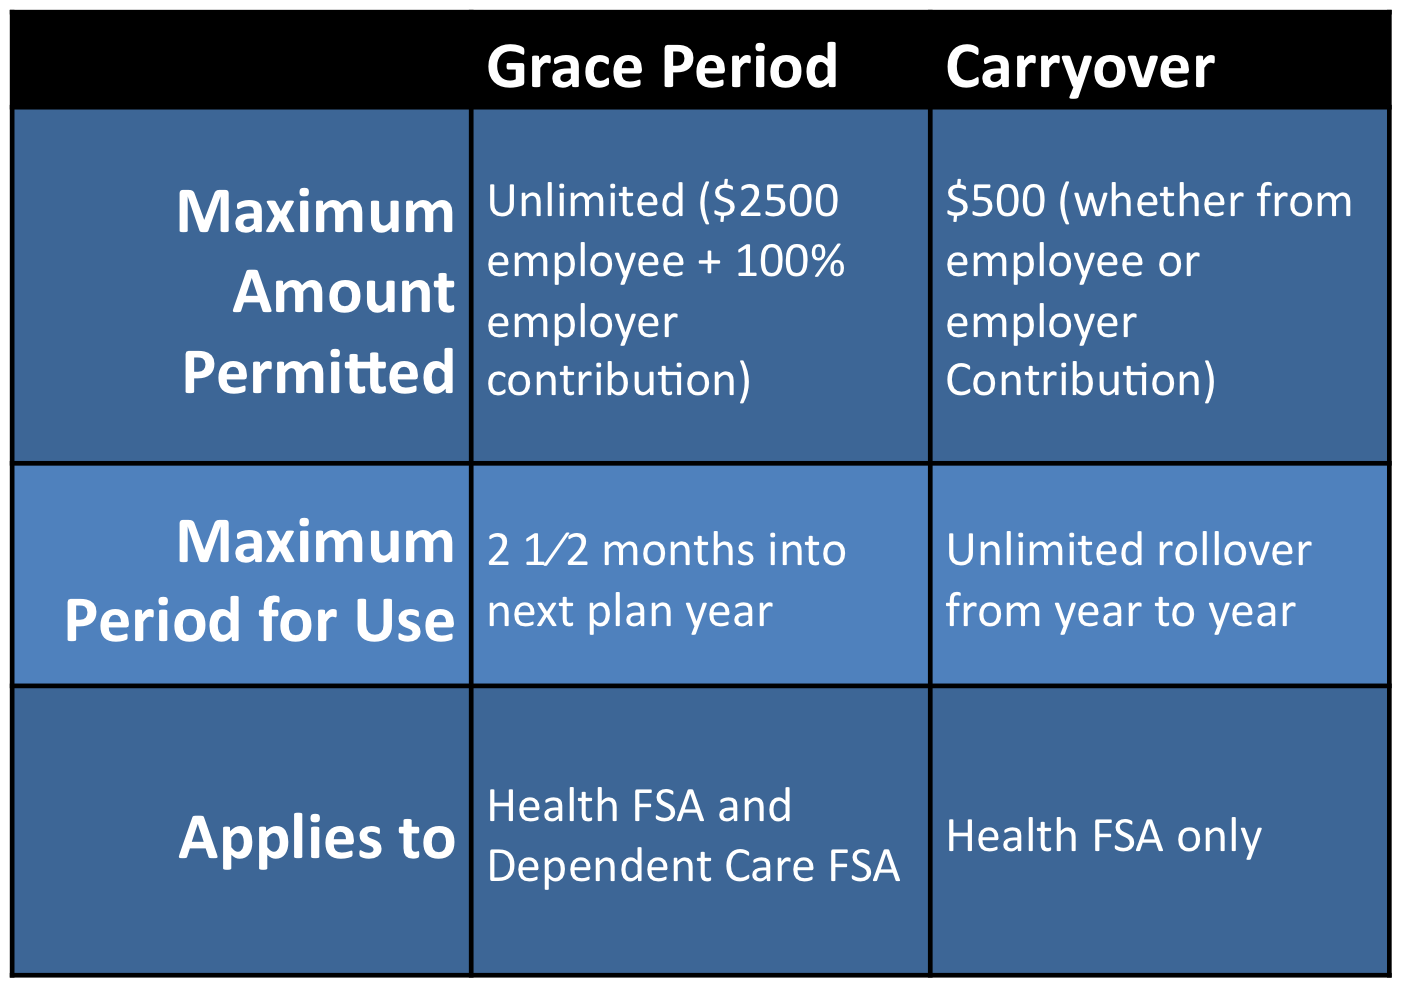 IRS Announces $500 Carry‐Over Provision for Health FSA Plans!